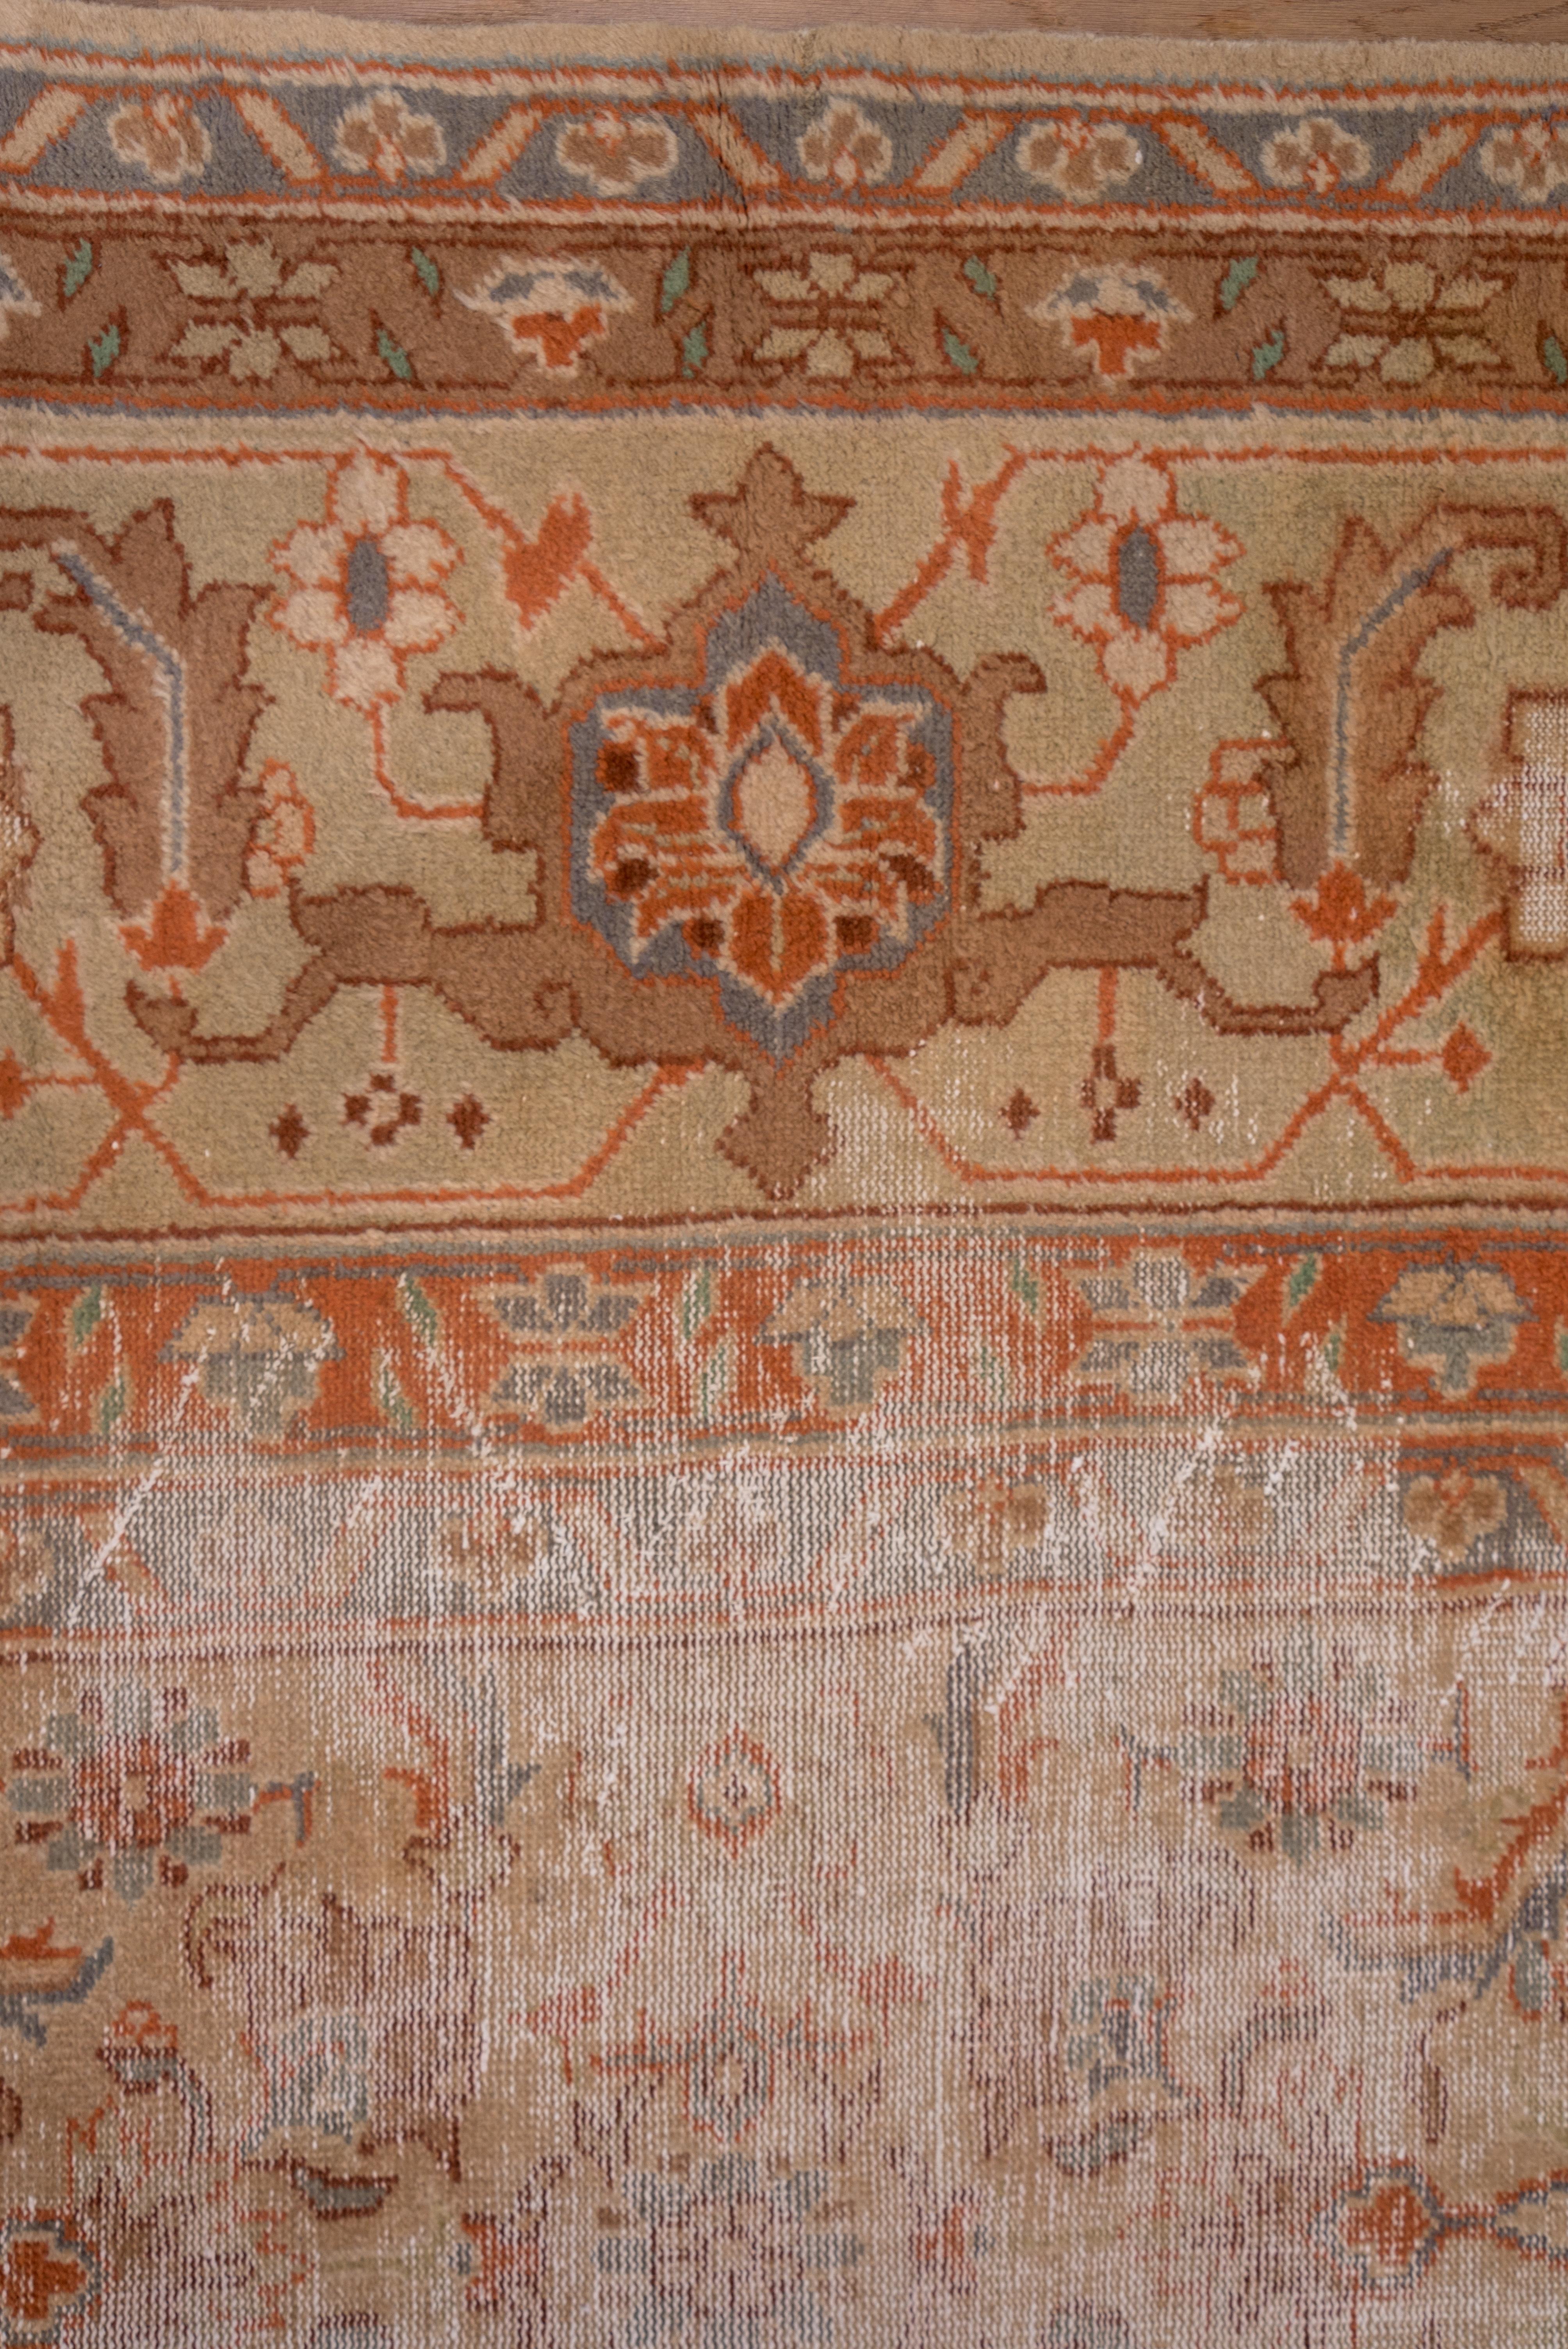 Indian Antique Distressed Square Amritsar Carpet For Sale